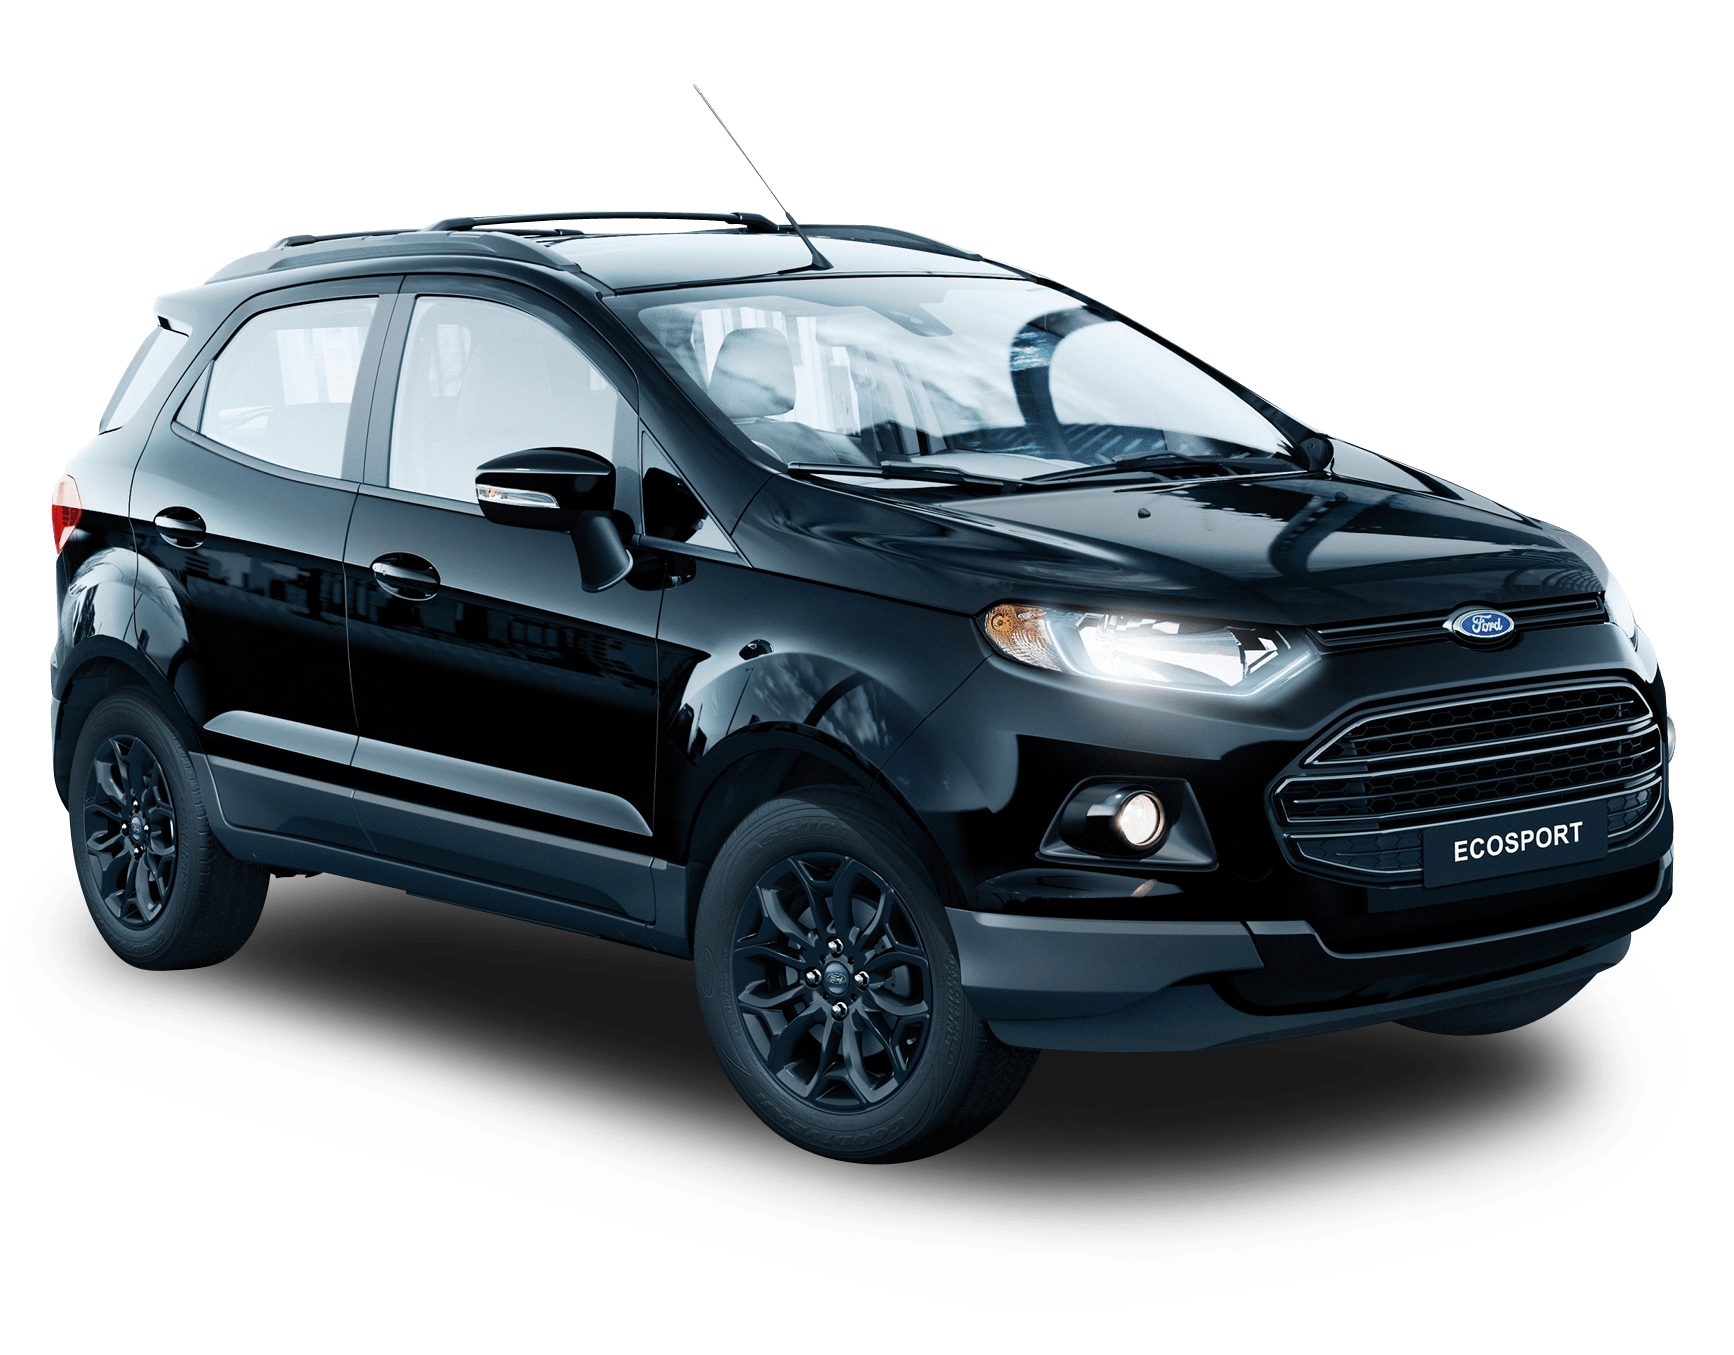 https://carsguide-res.cloudinary.com/image/upload/f_auto,fl_lossy,q_auto,t_default/v1/editorial/vhs/Ford-EcoSport_1.png